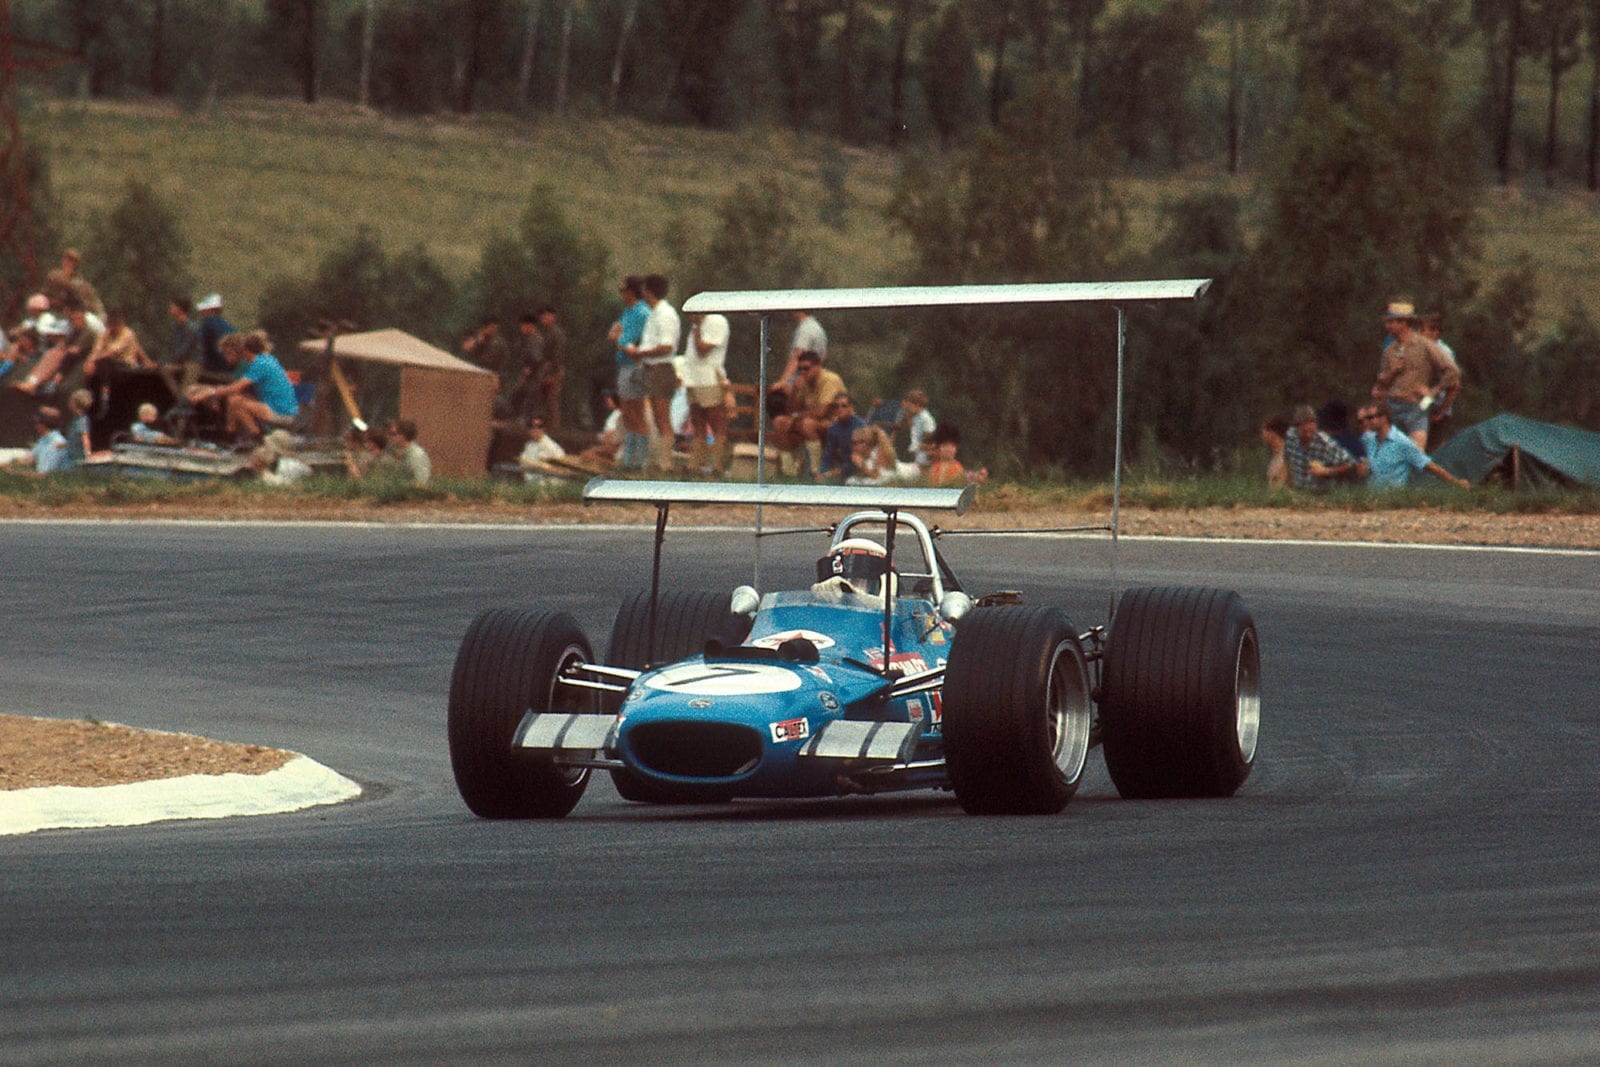 Jackie Stewart in his Matra-Ford at the 1969 South African Grand Prix.